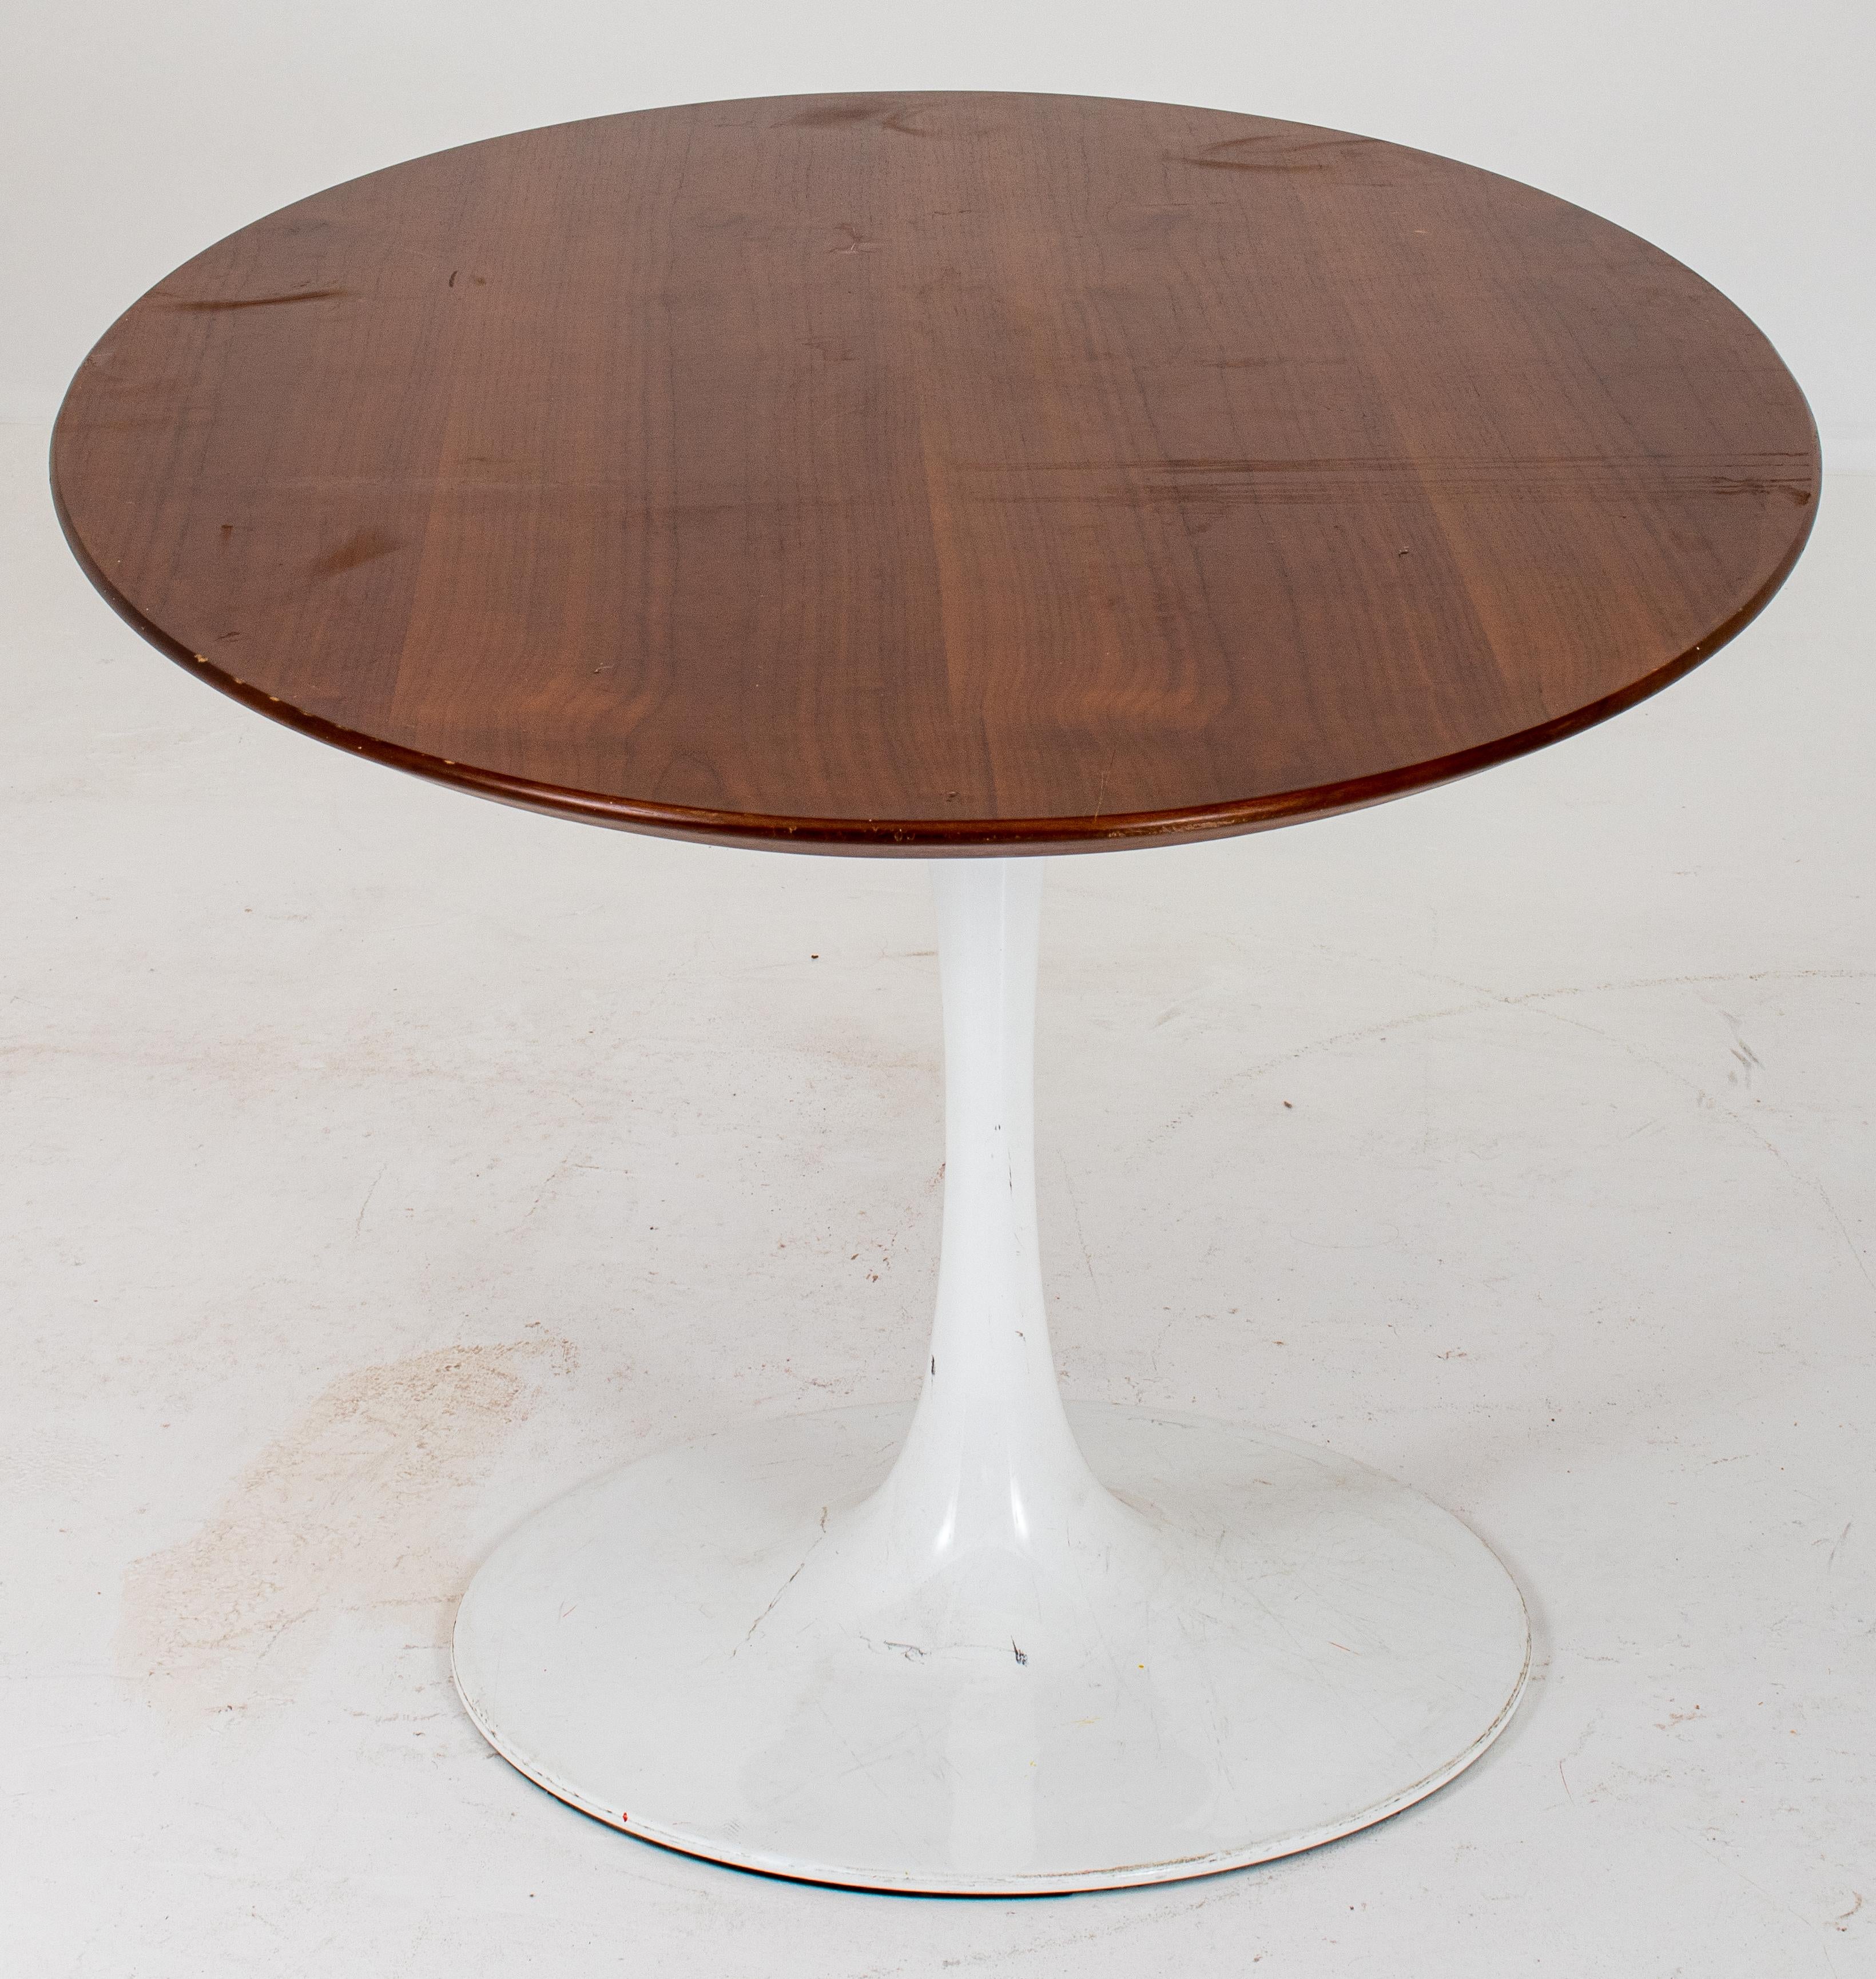 Eero Saarinen for Knoll style oval dining table with white mushroom base and walnut top. Measures: 29